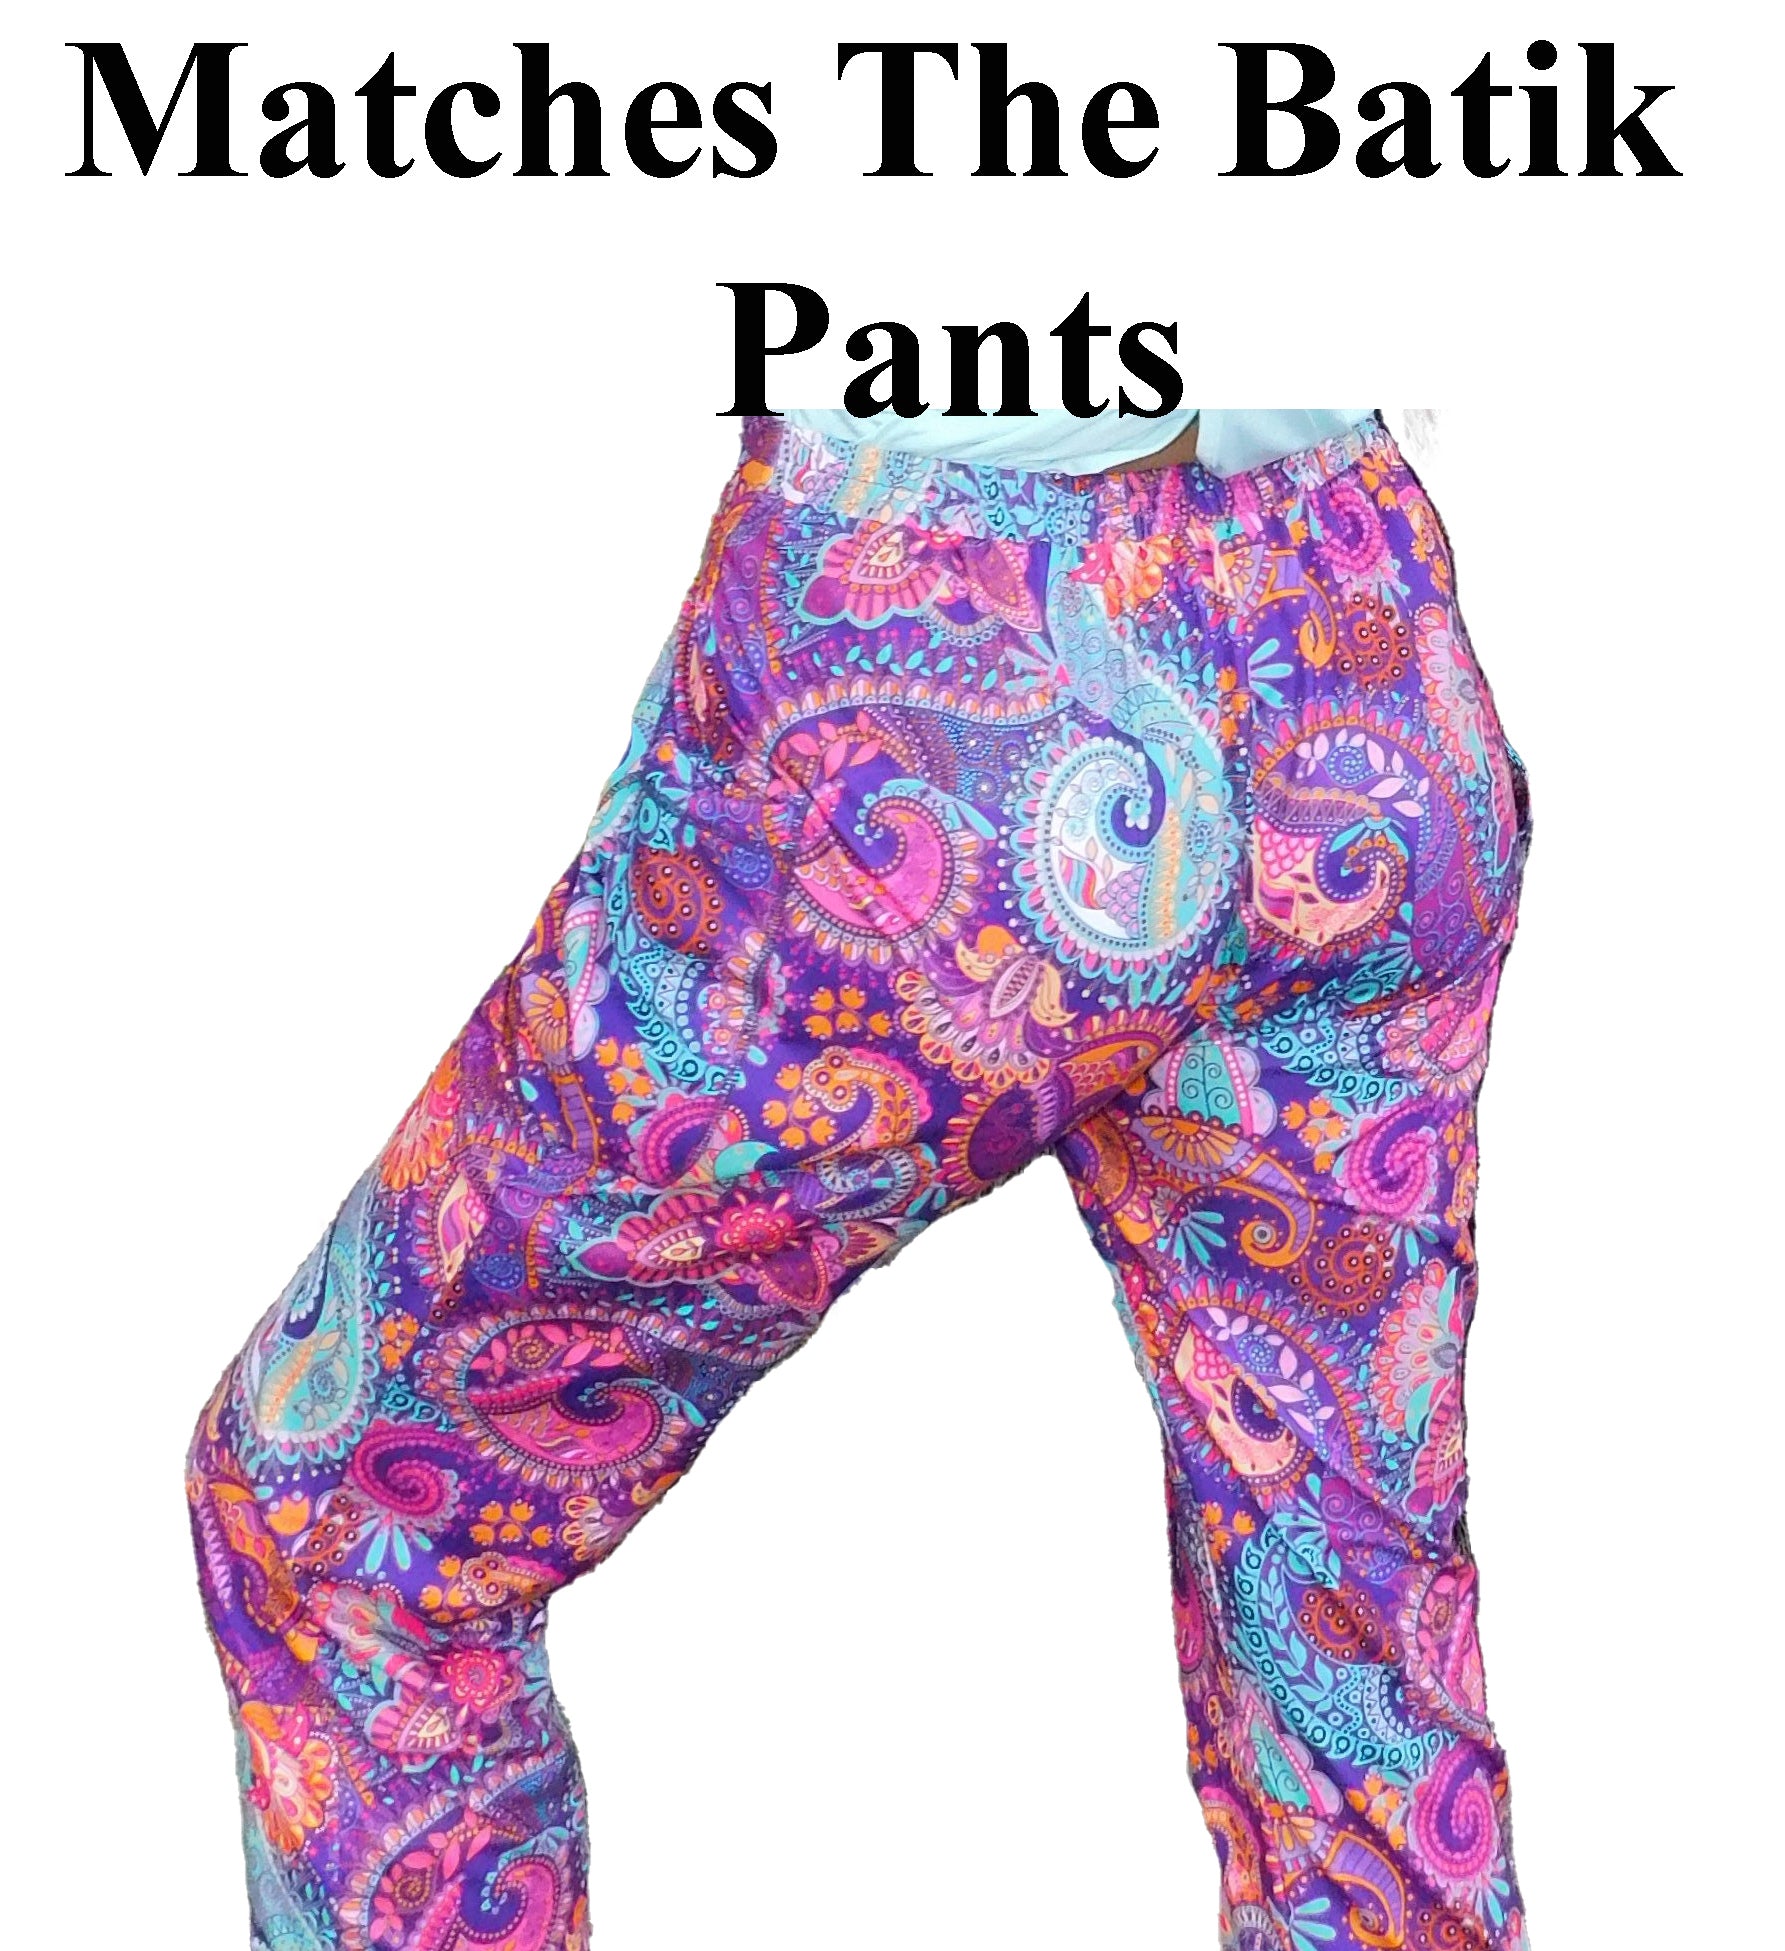 a woman's pants with a paisley pattern on it